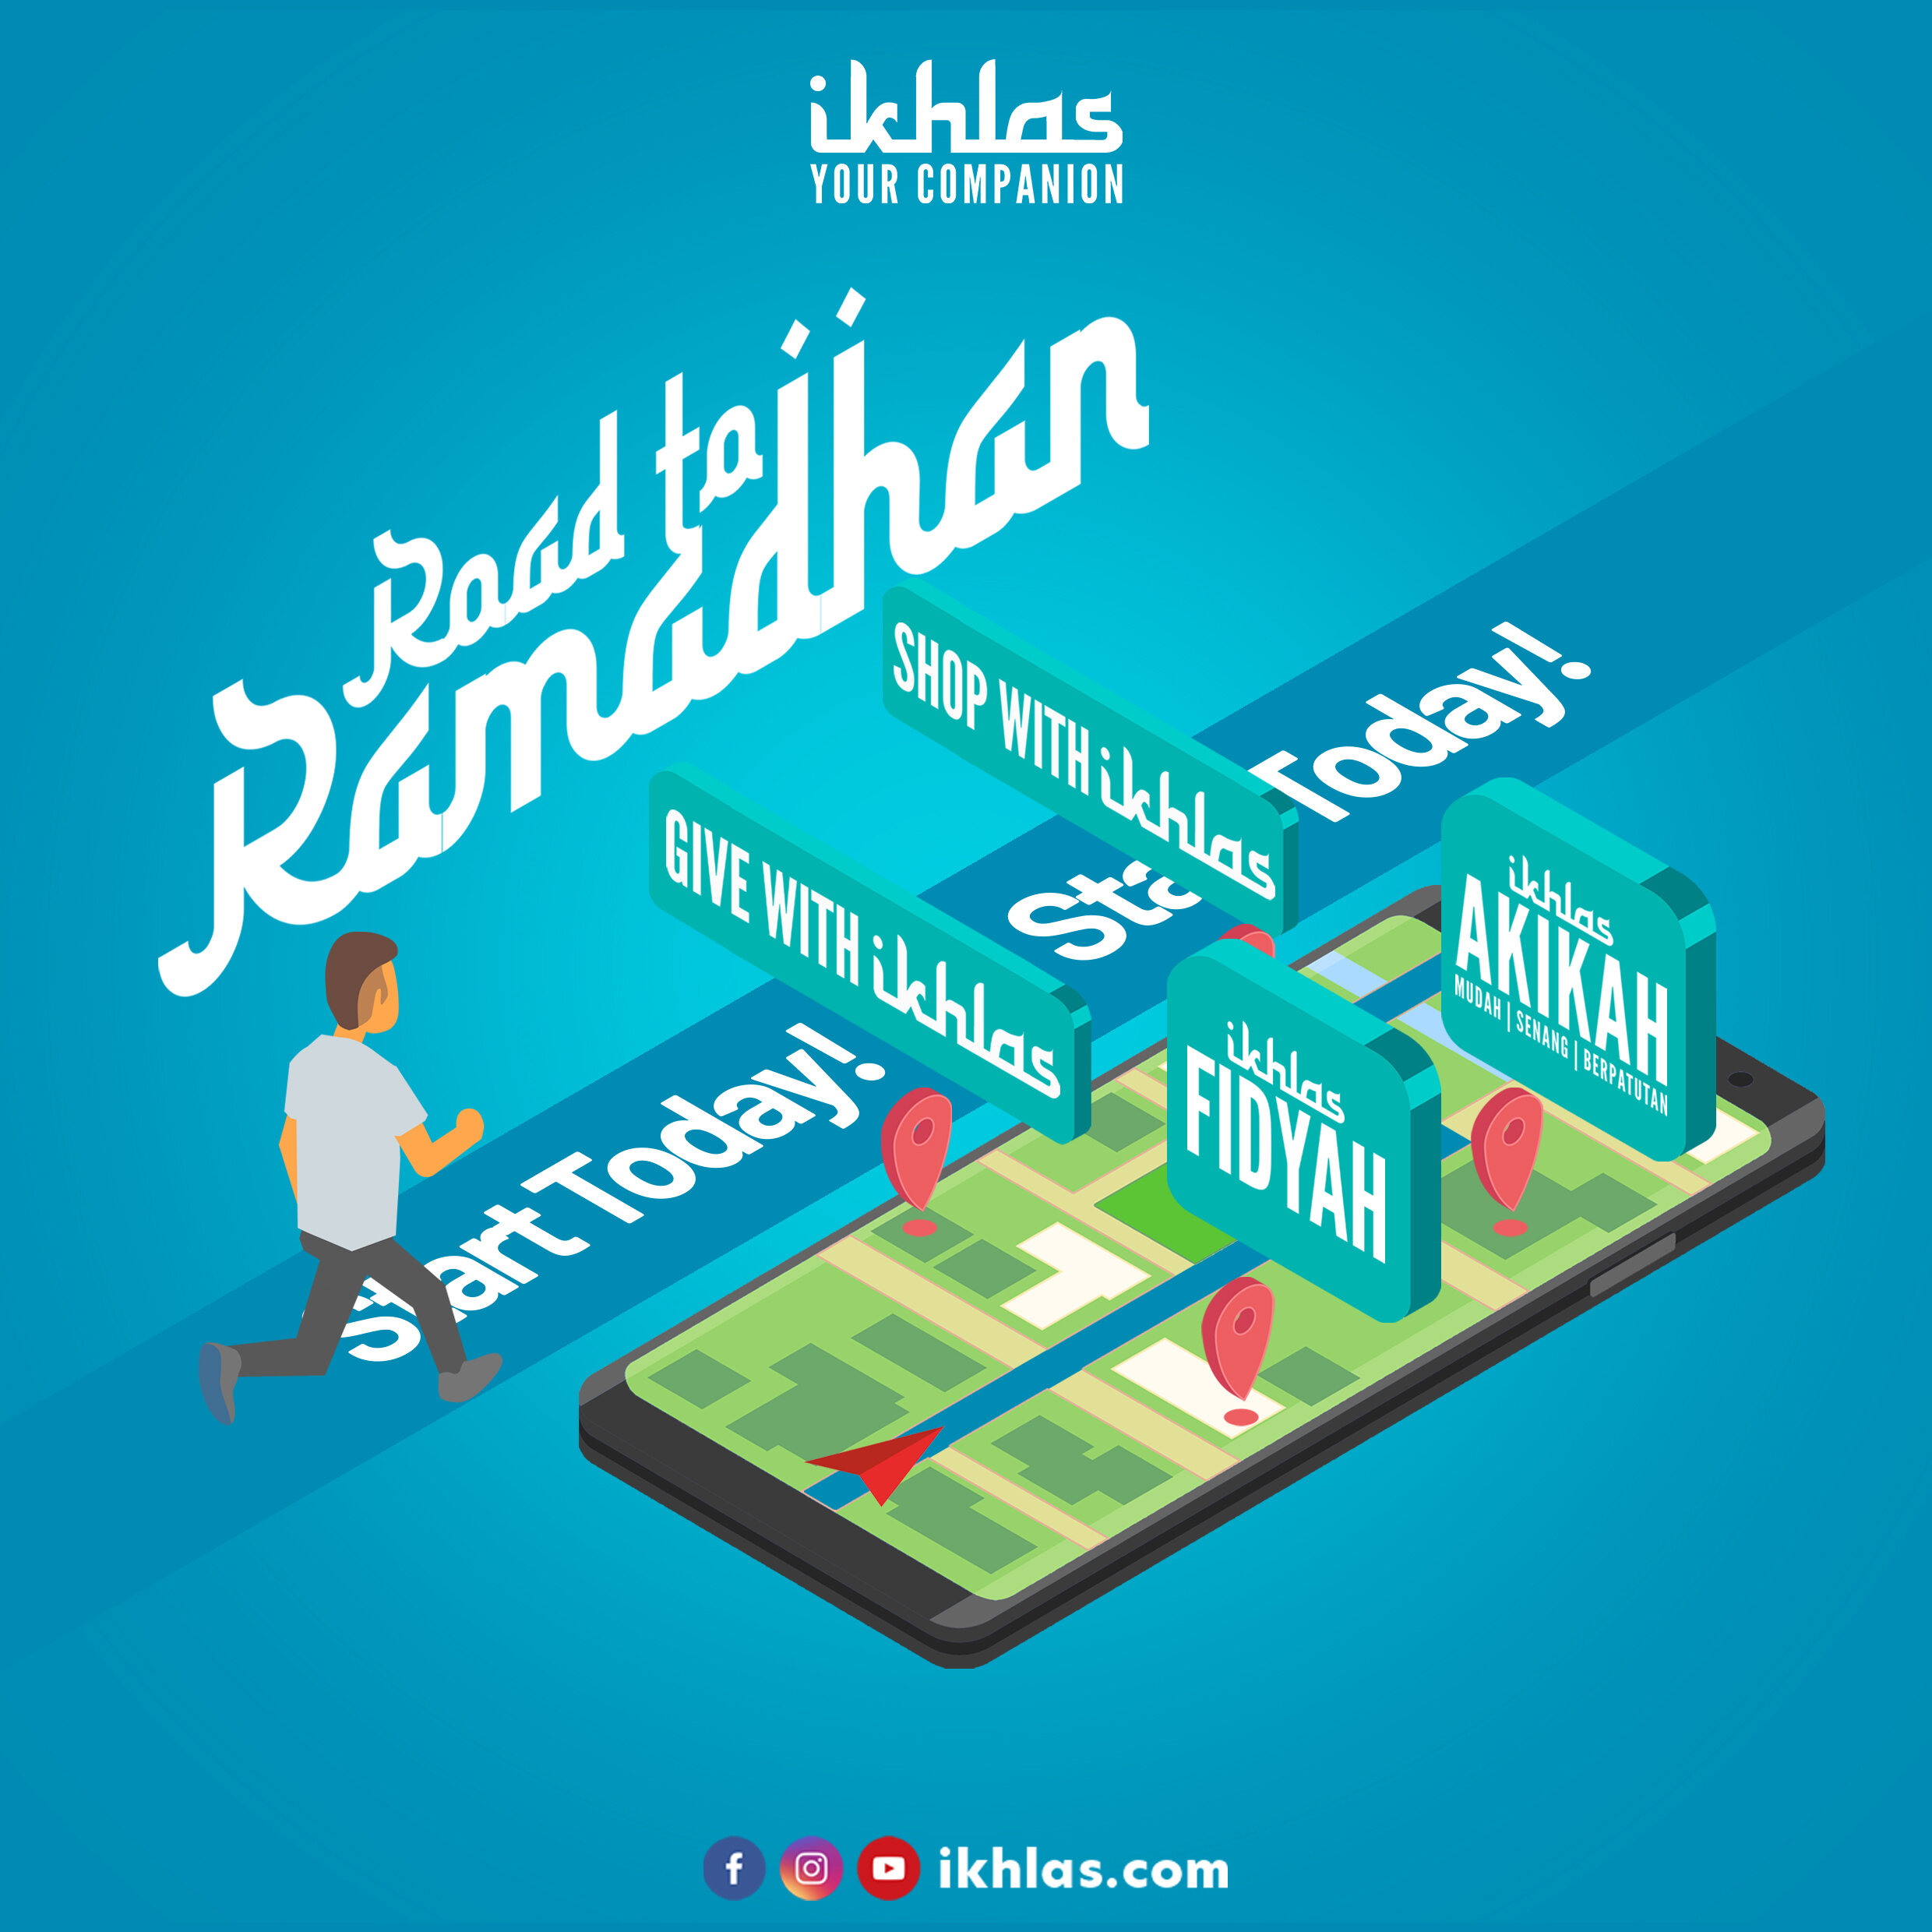 Ikhlas Launches Road To Ramadan Campaign Airasia Newsroom